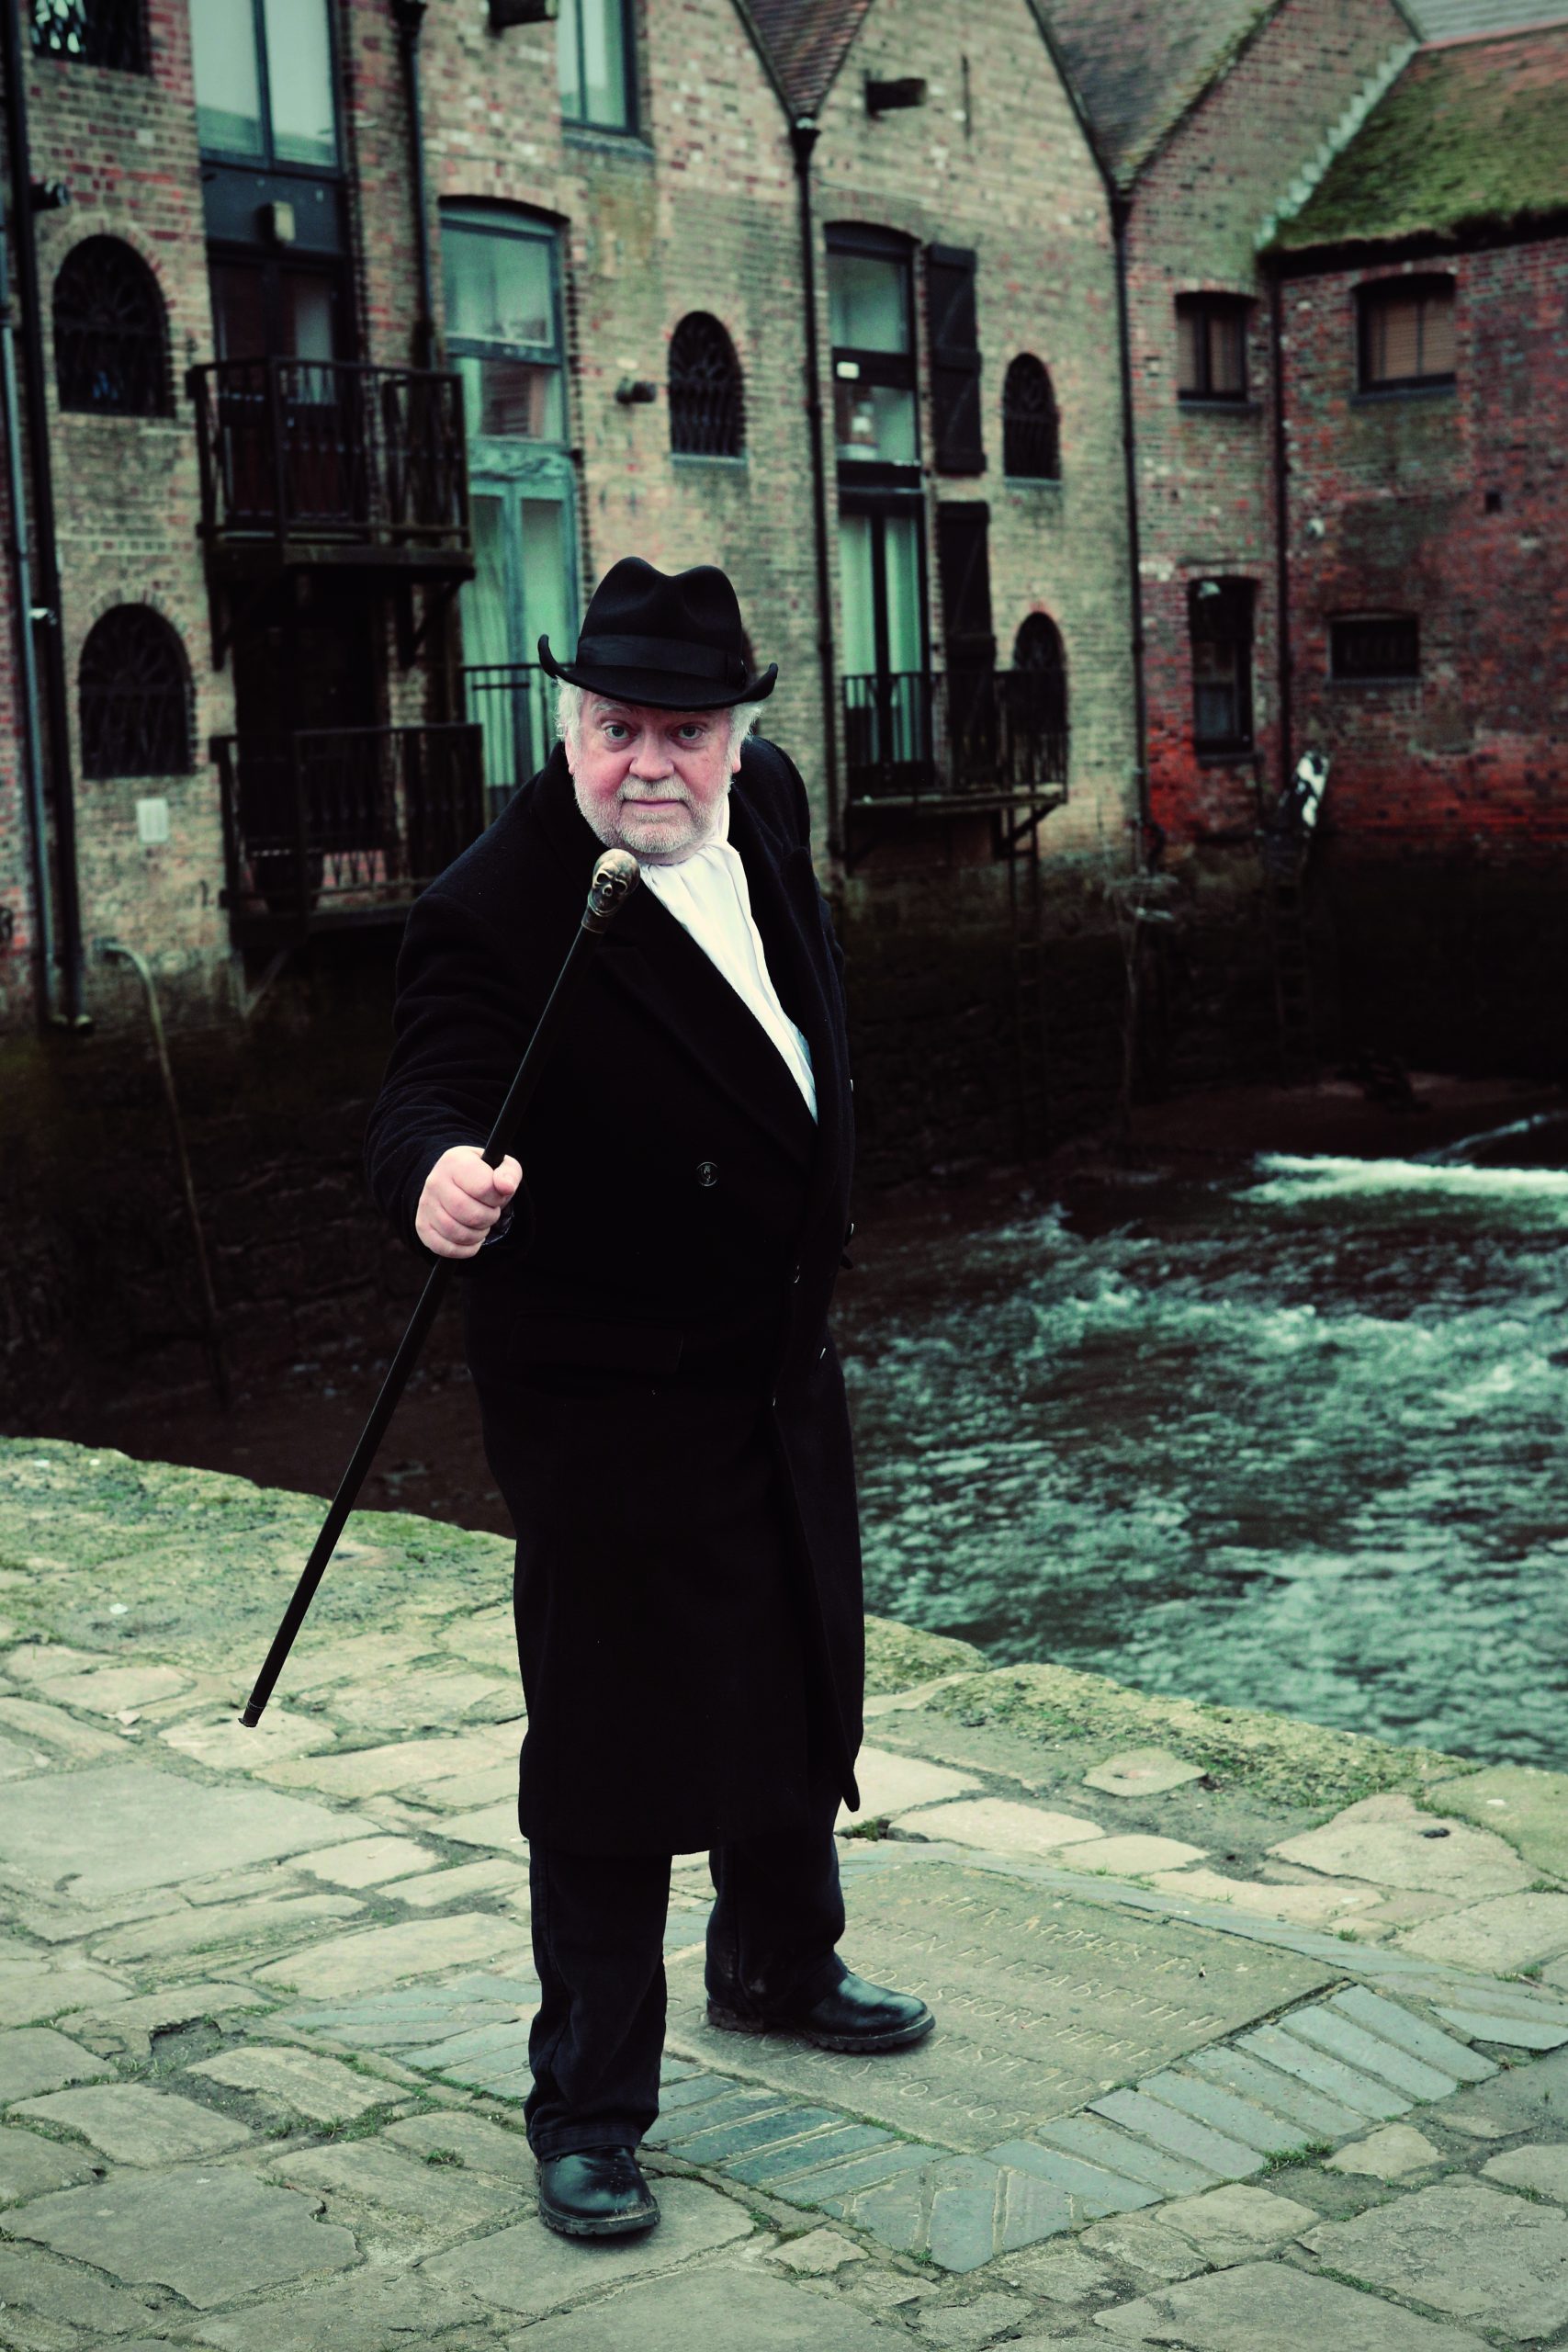 A man standing by a river wearing a black suit and hat, with a walking stick